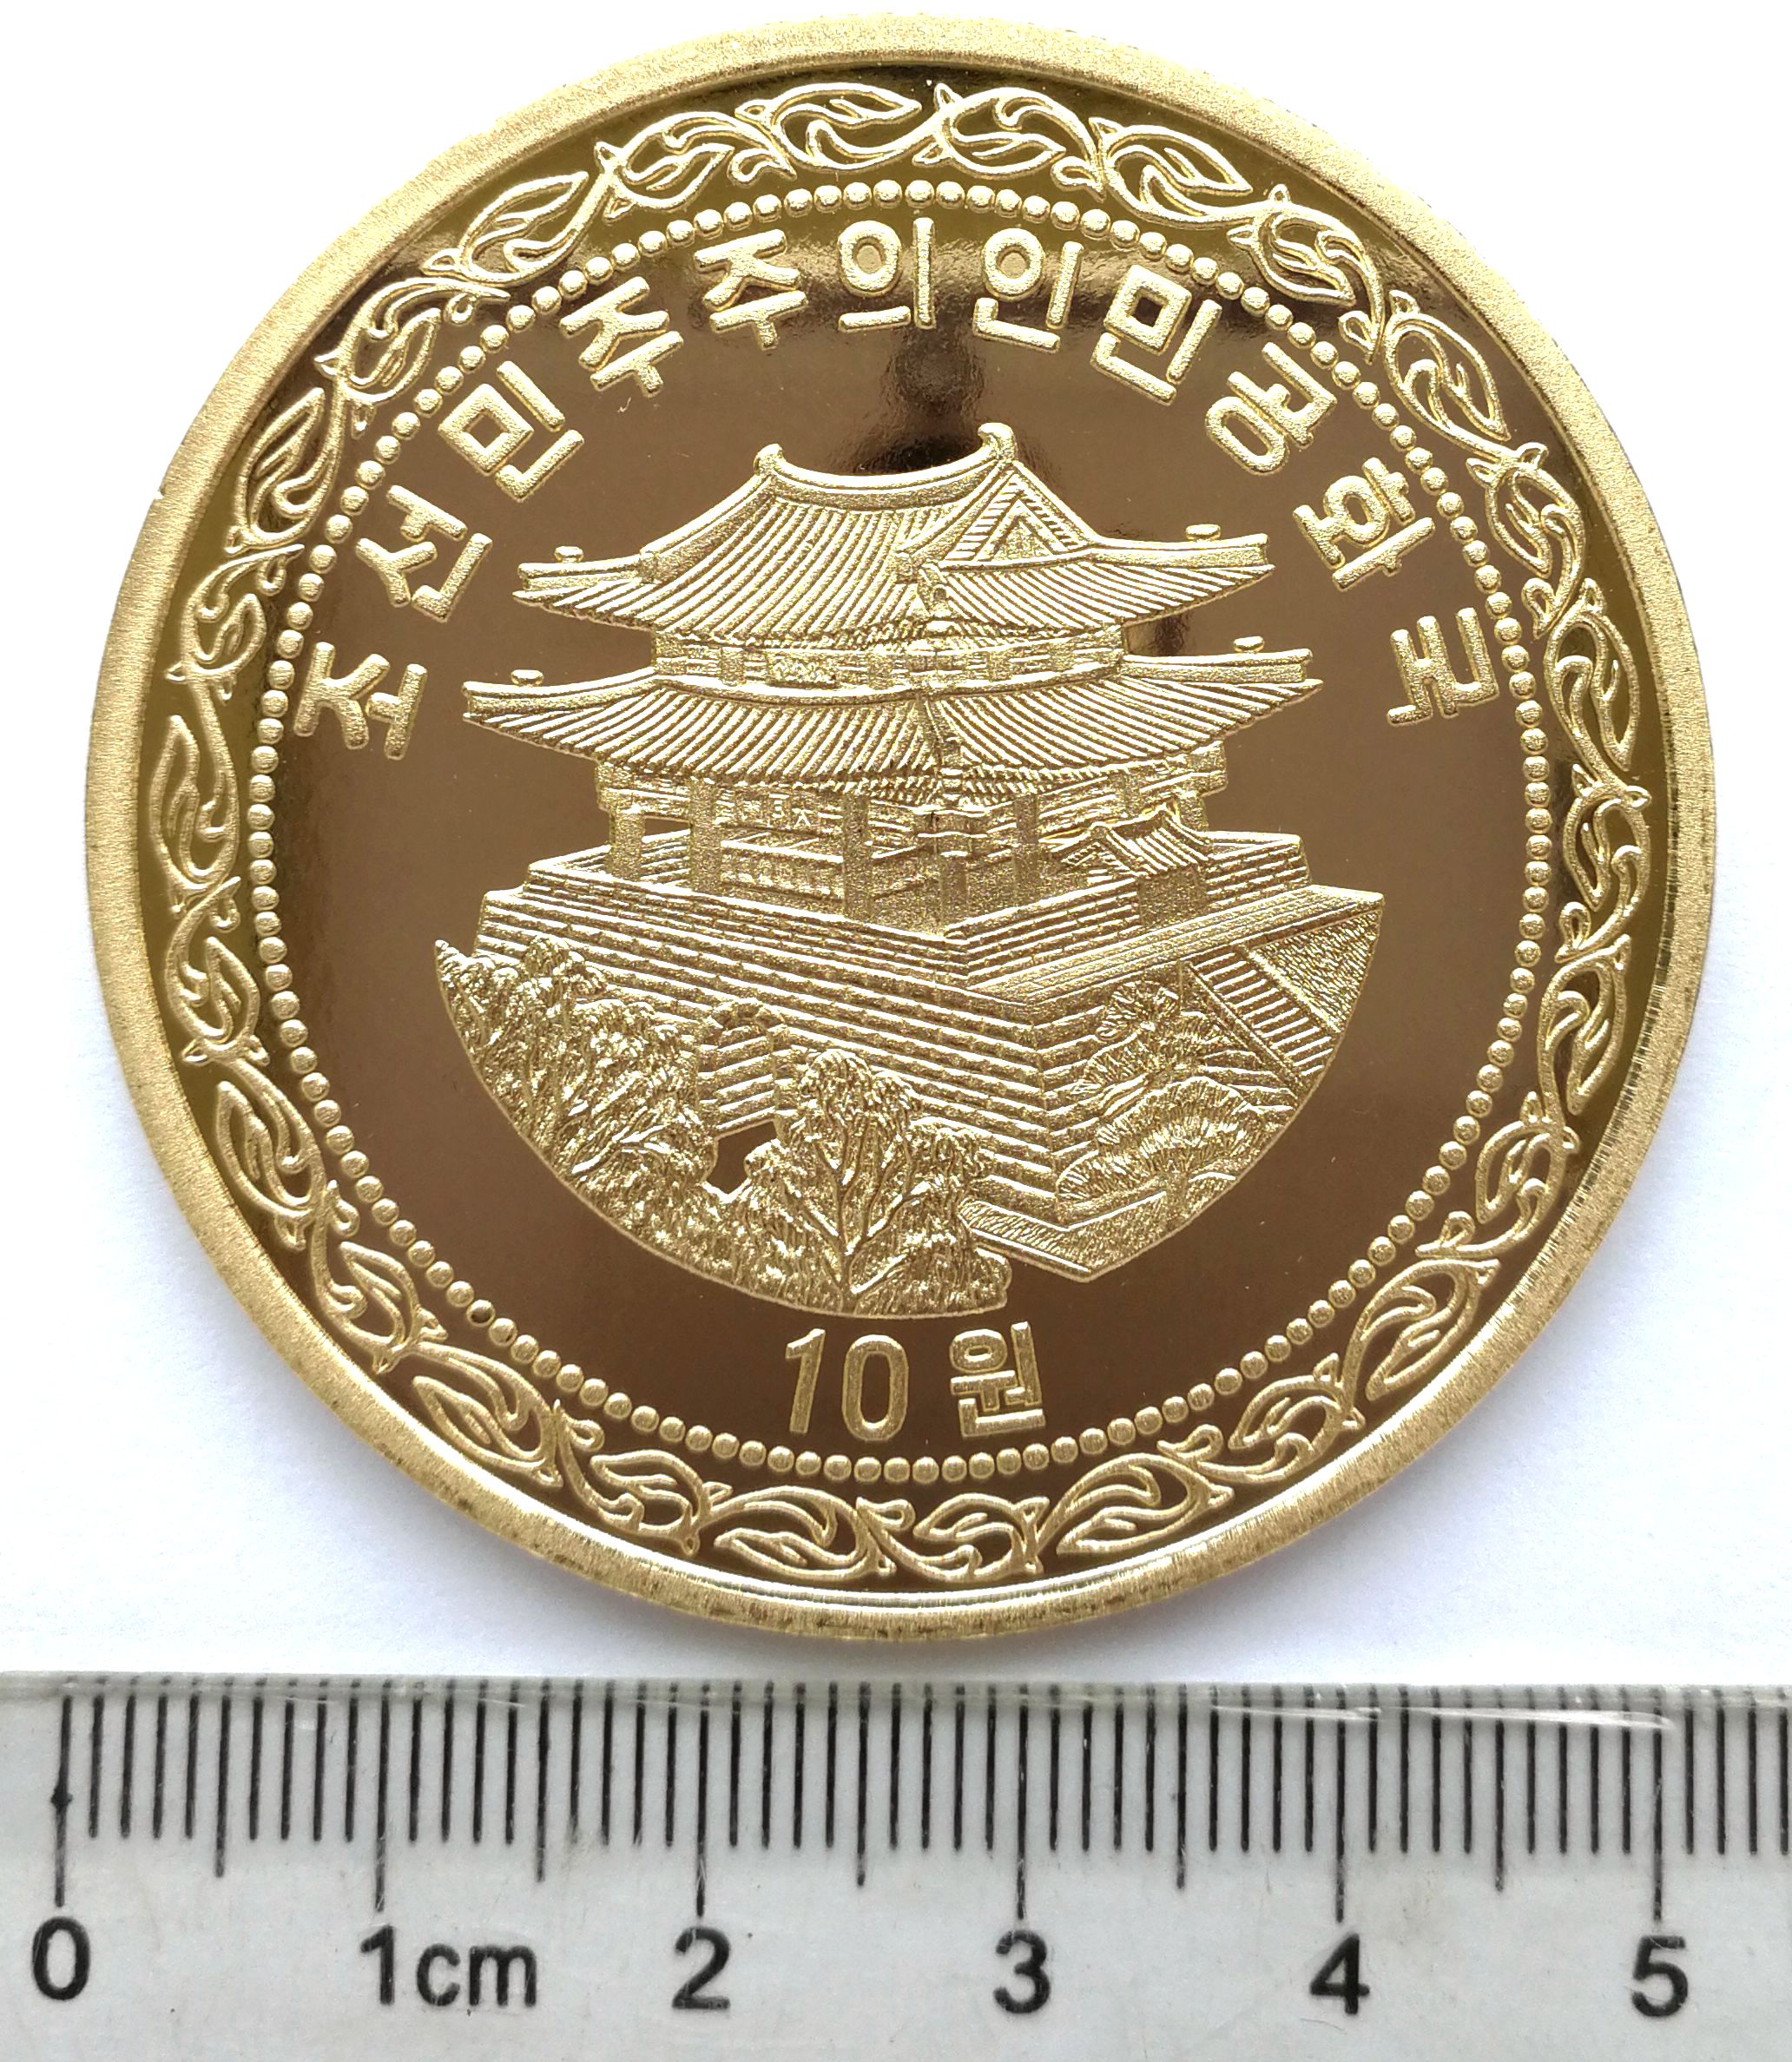 L3270, Korea "Destroy the United Stated" Large Proof Coin, 2018 Brass, Rare - Click Image to Close